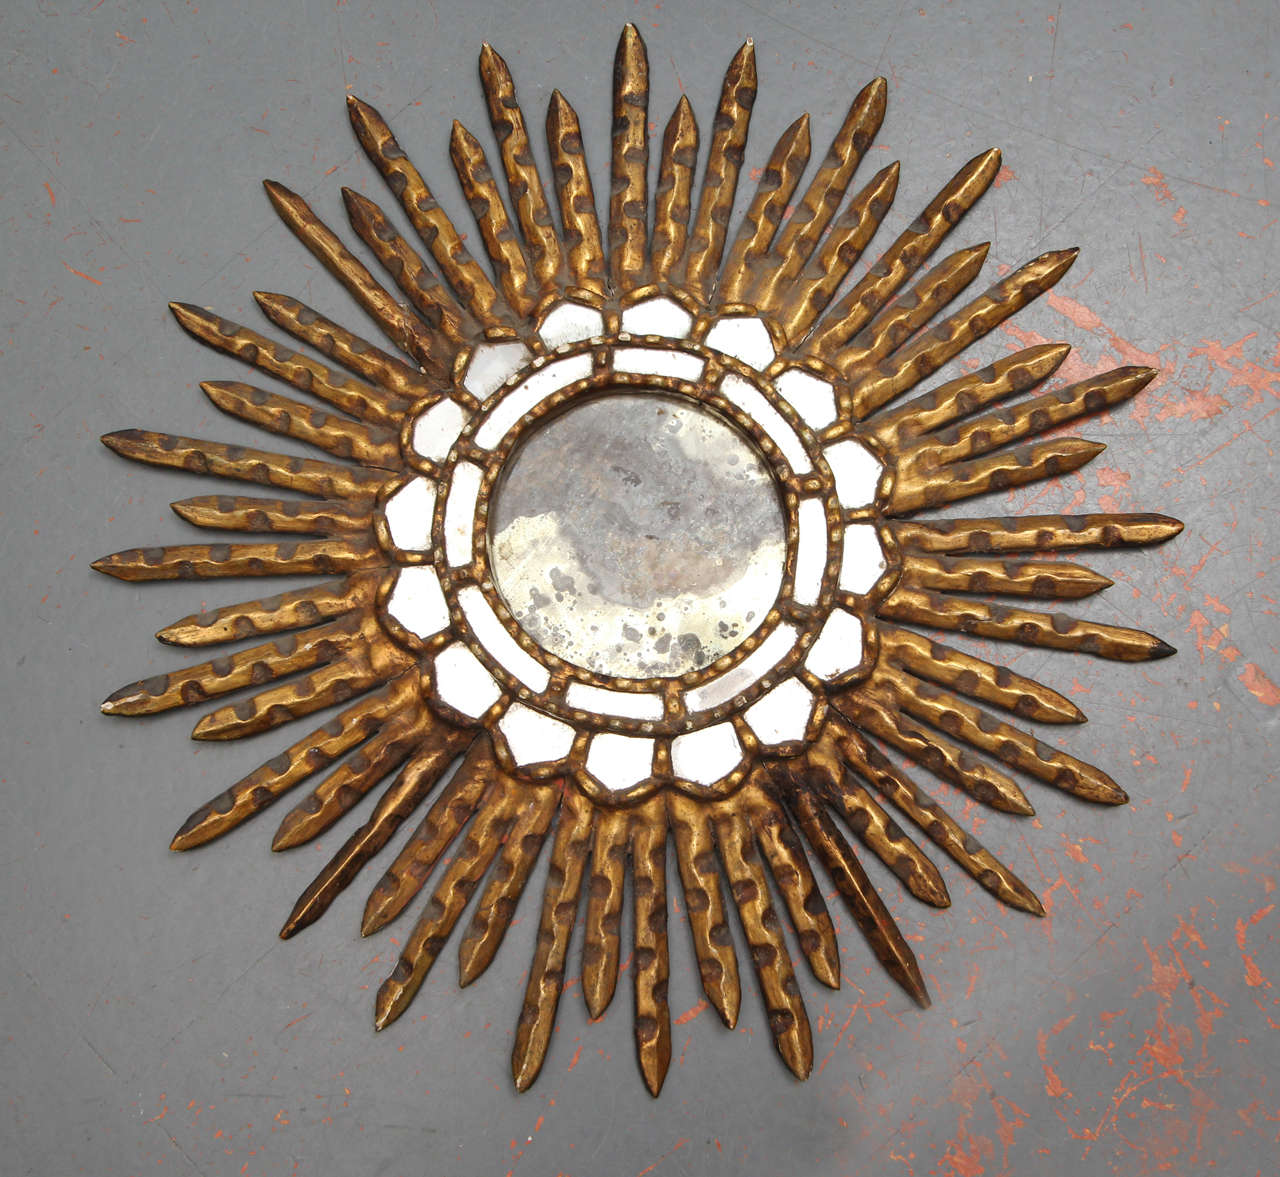 Small-scale wood gilt sunburst mirror with distressed mirror.